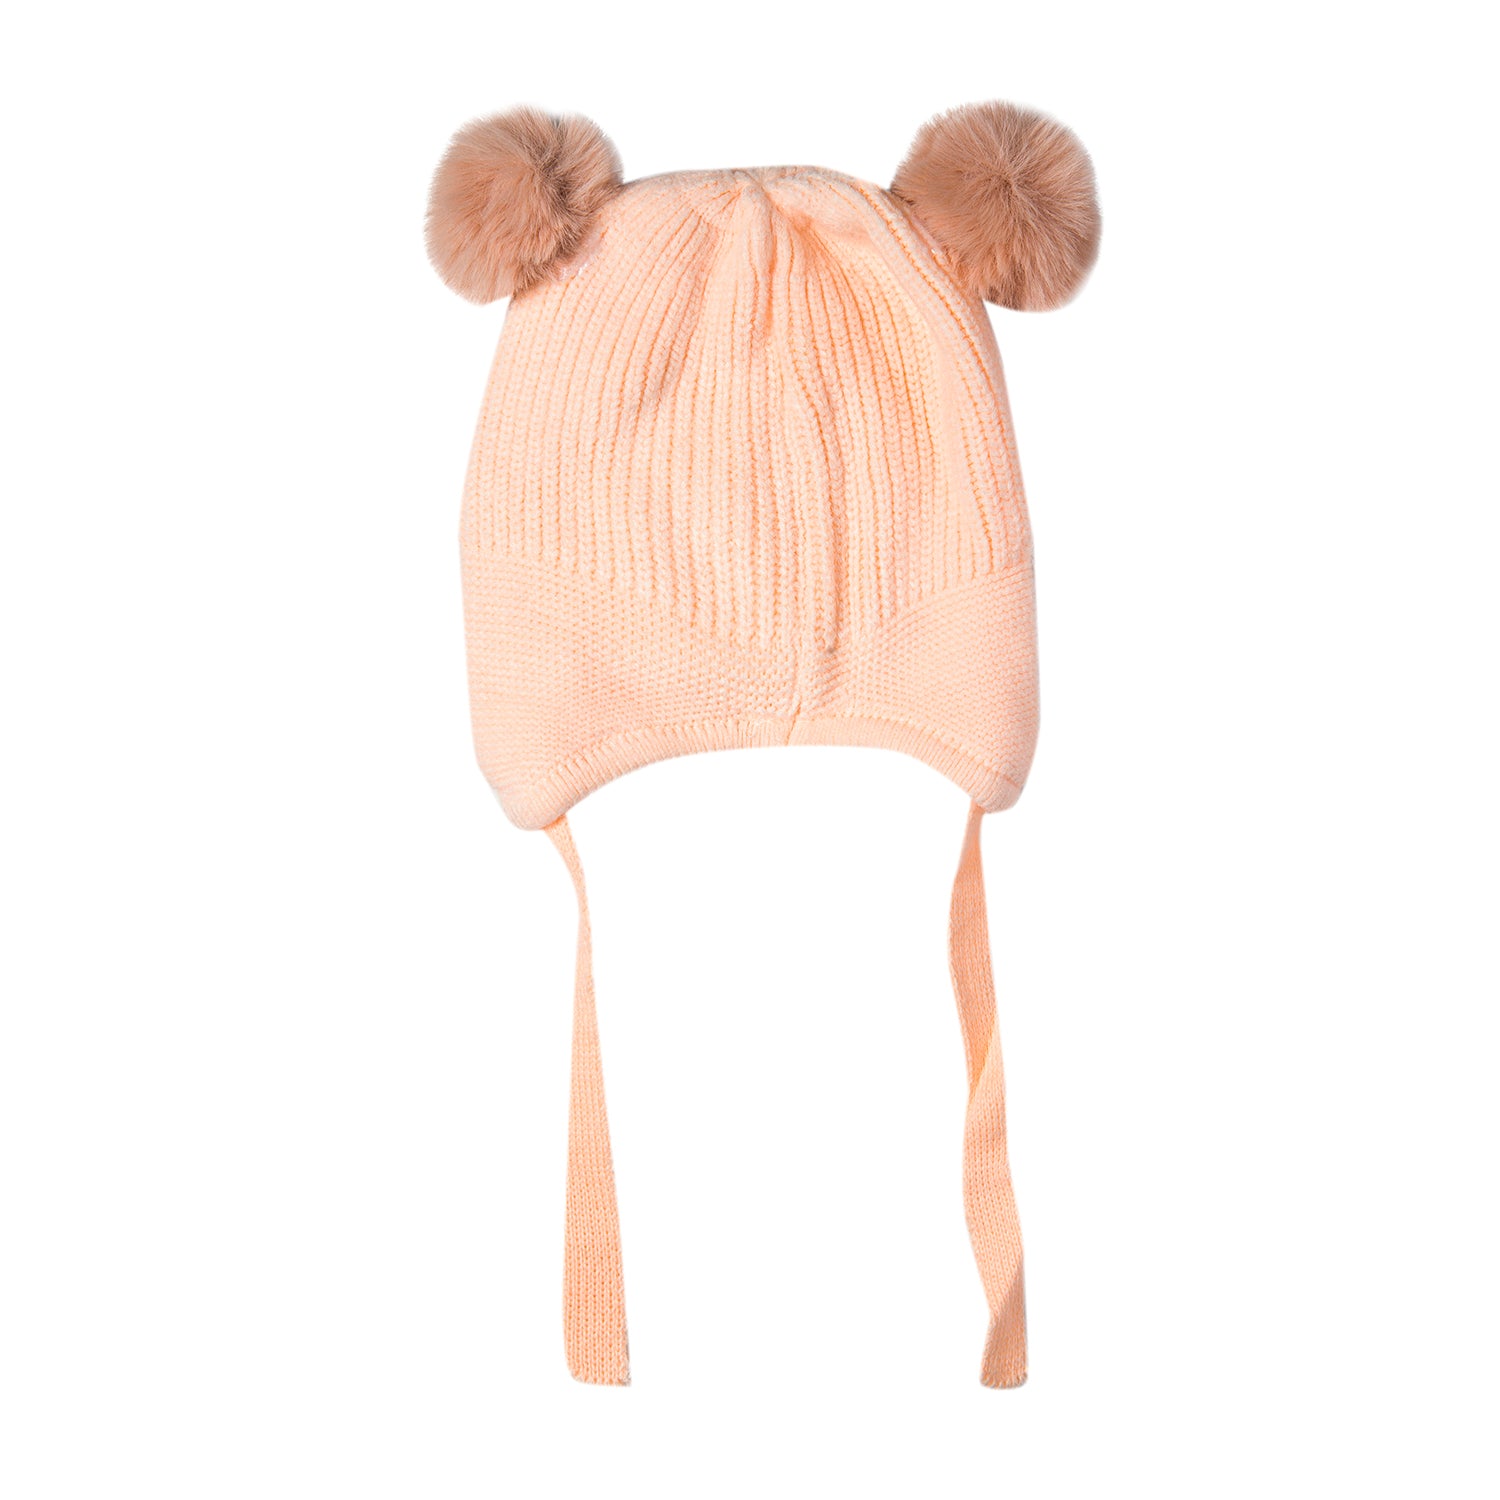 Knit Woollen Cap With Tie Knot For Ear Protection Solid Peach - Baby Moo